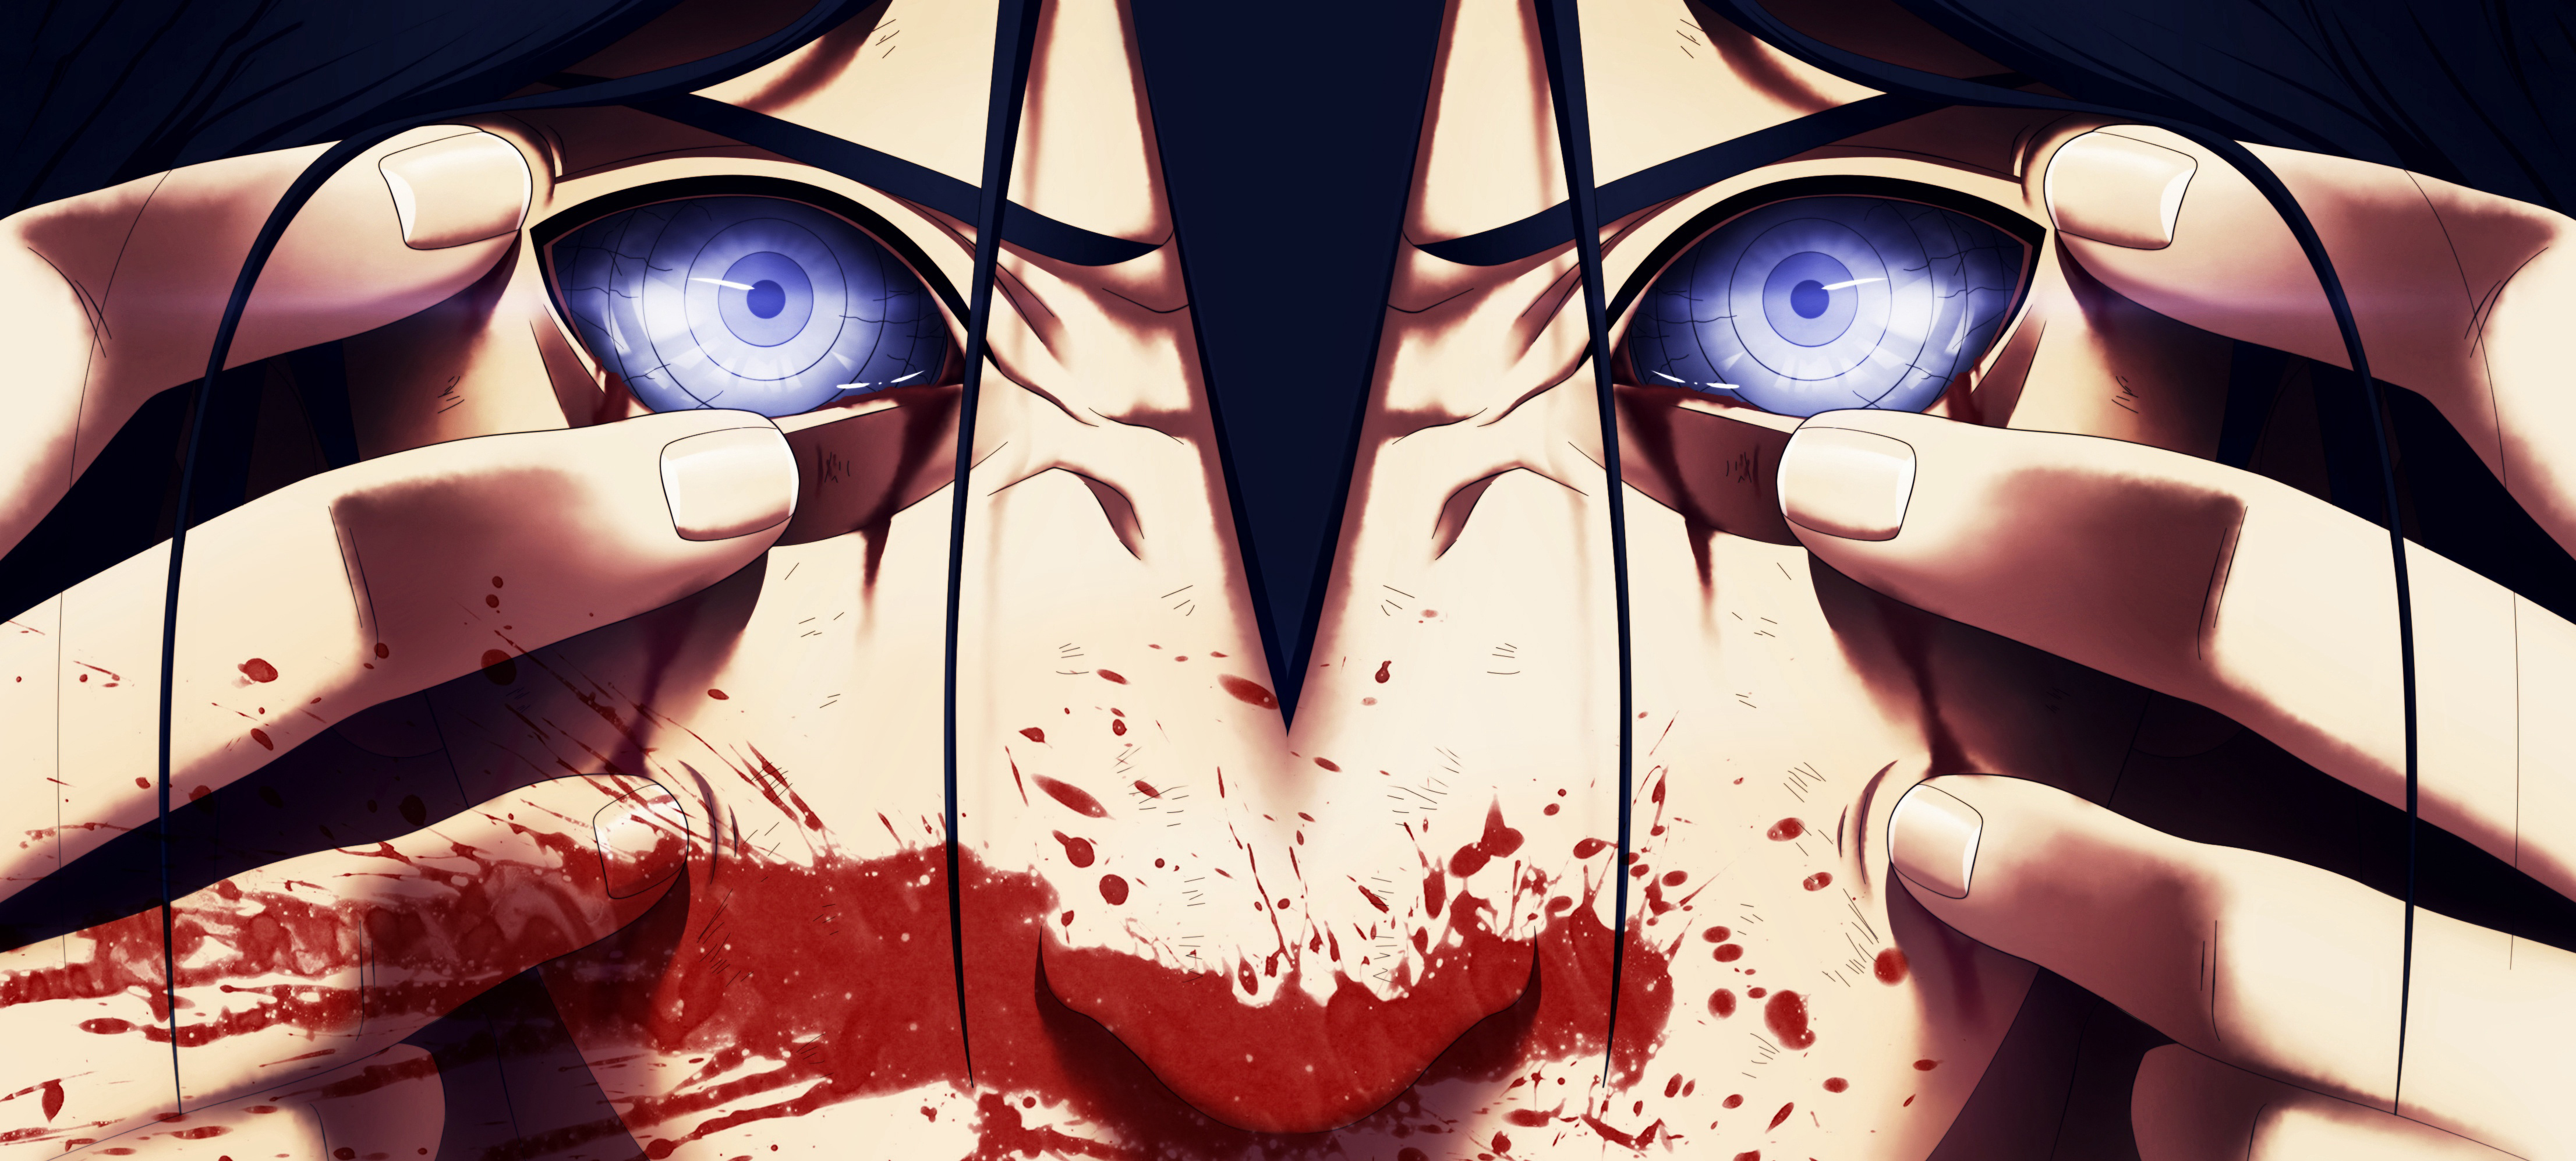 Madara Uchiha wallpapers for desktop, download free Madara Uchiha pictures  and backgrounds for PC 